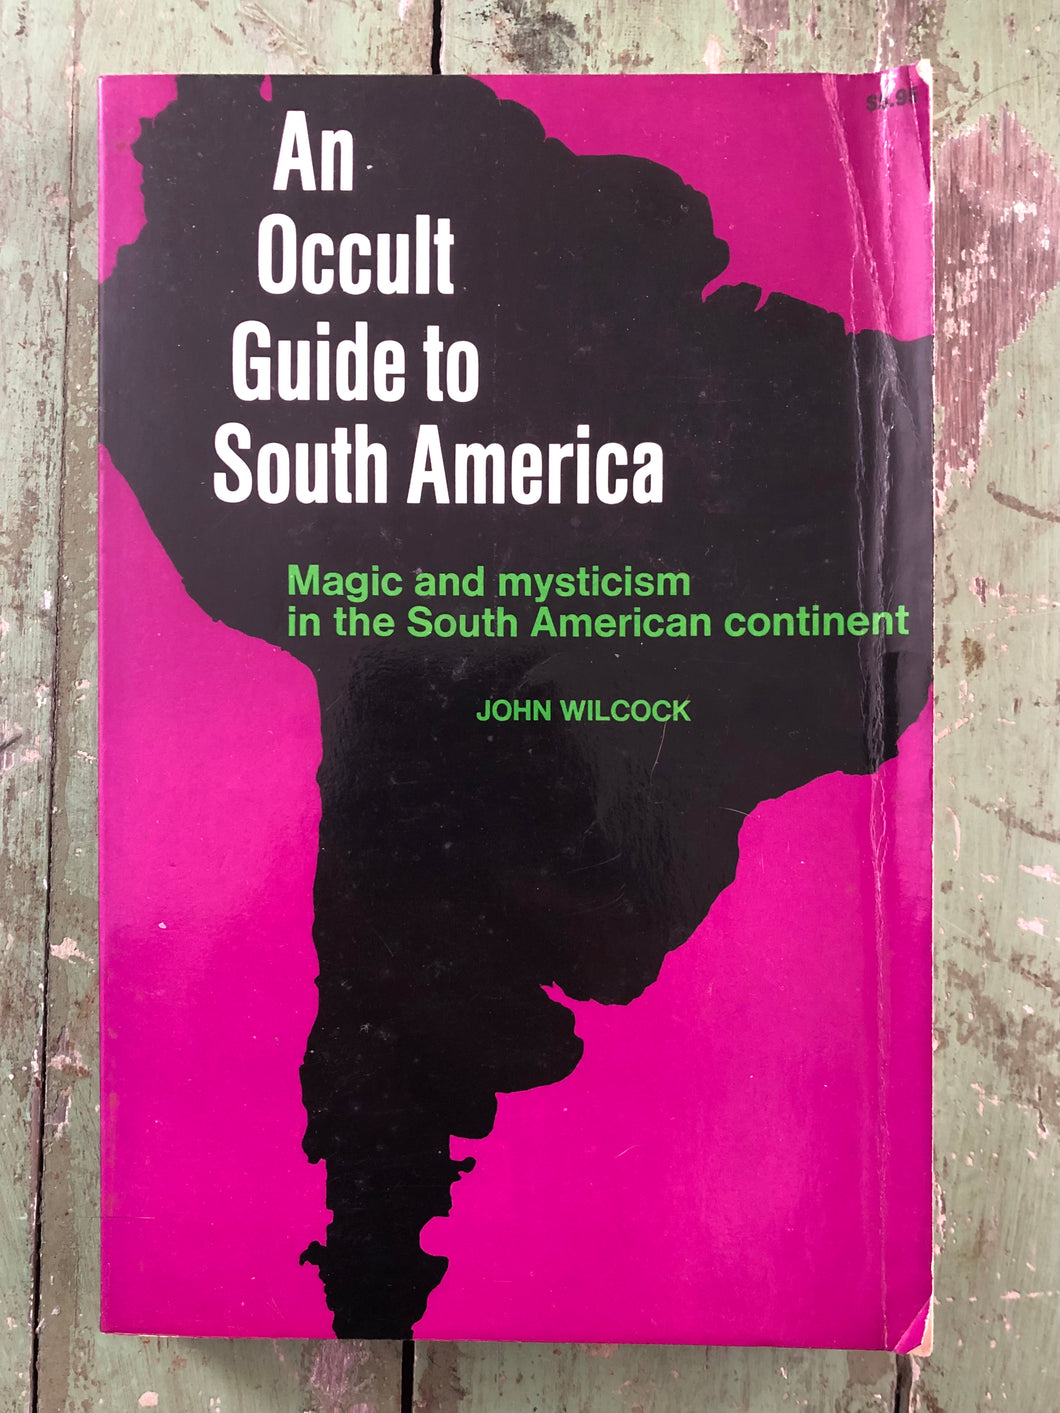 An Occult Guide to South America by John Wilcock